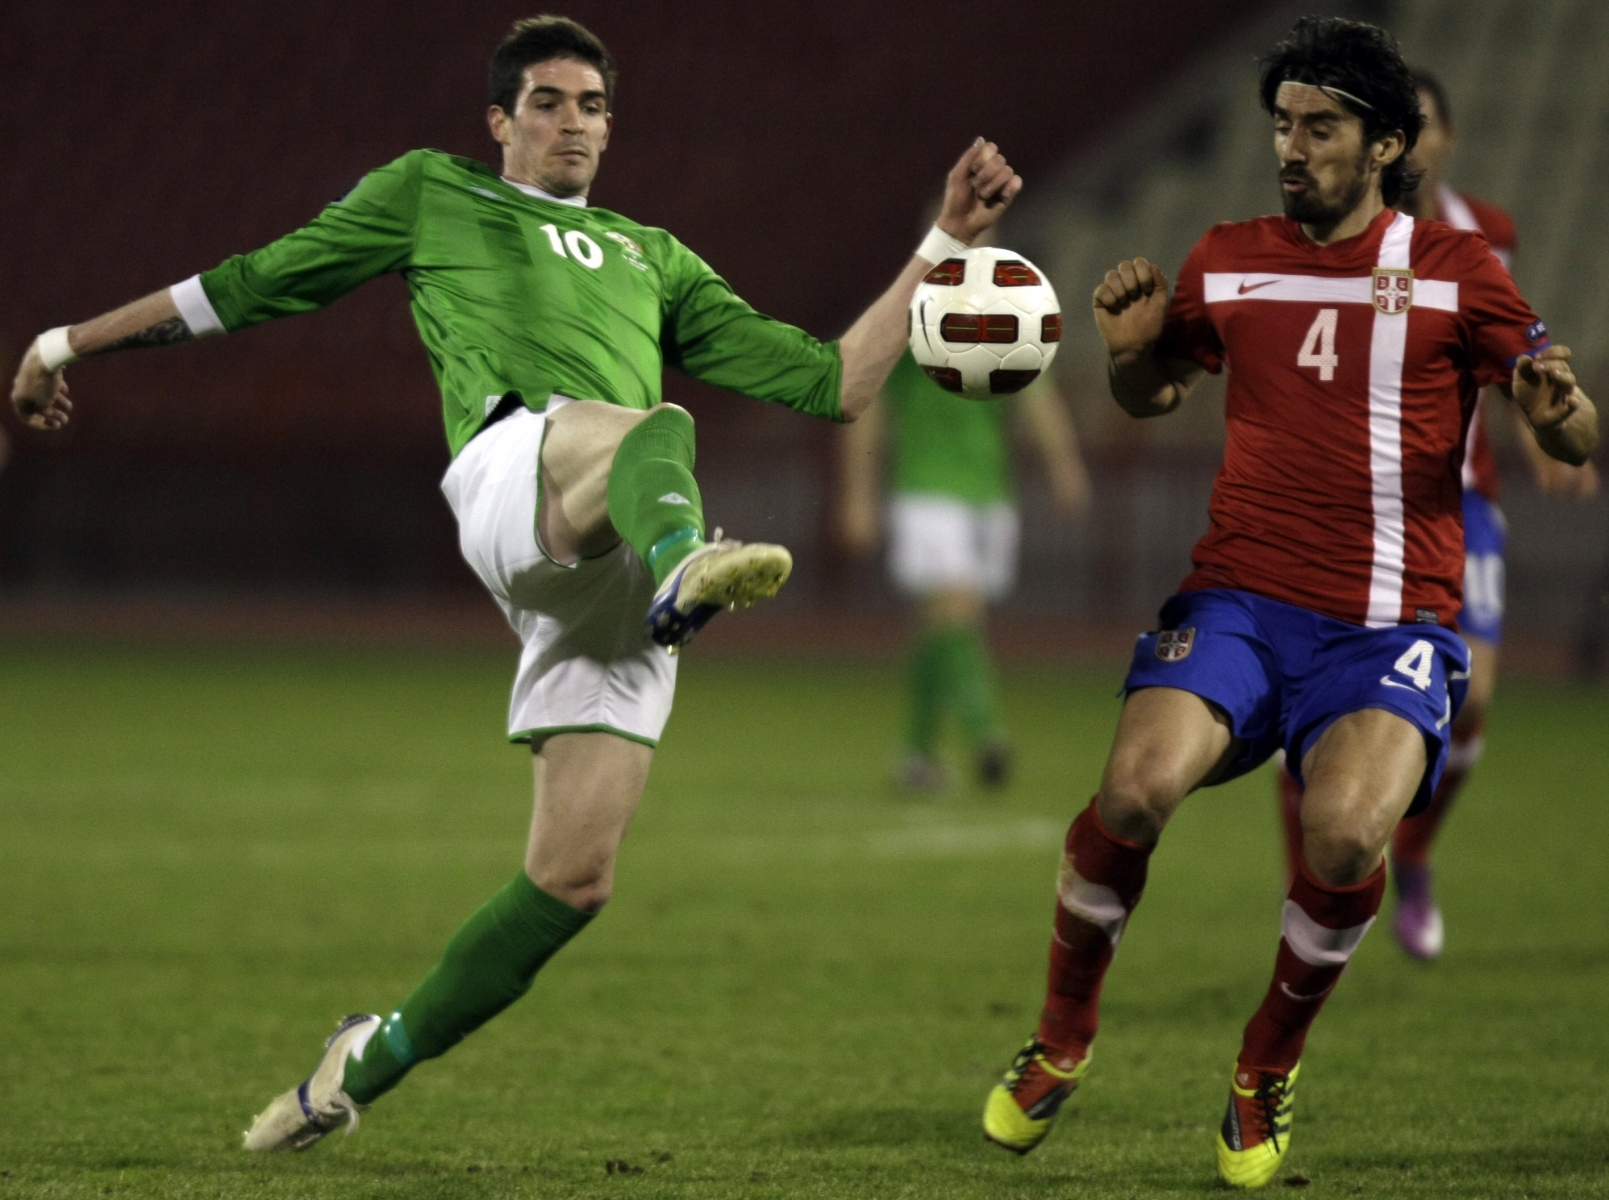 Kyle Lafferty of Northern Ireland, left, touches the ball ahead of Serbia's Milan Bisevac during their Euro 2012 Group C qualifying soccer match in Belgrade, Serbia, Friday, March 25, 2011. (AP Photo/ Marko Drobnjakovic)